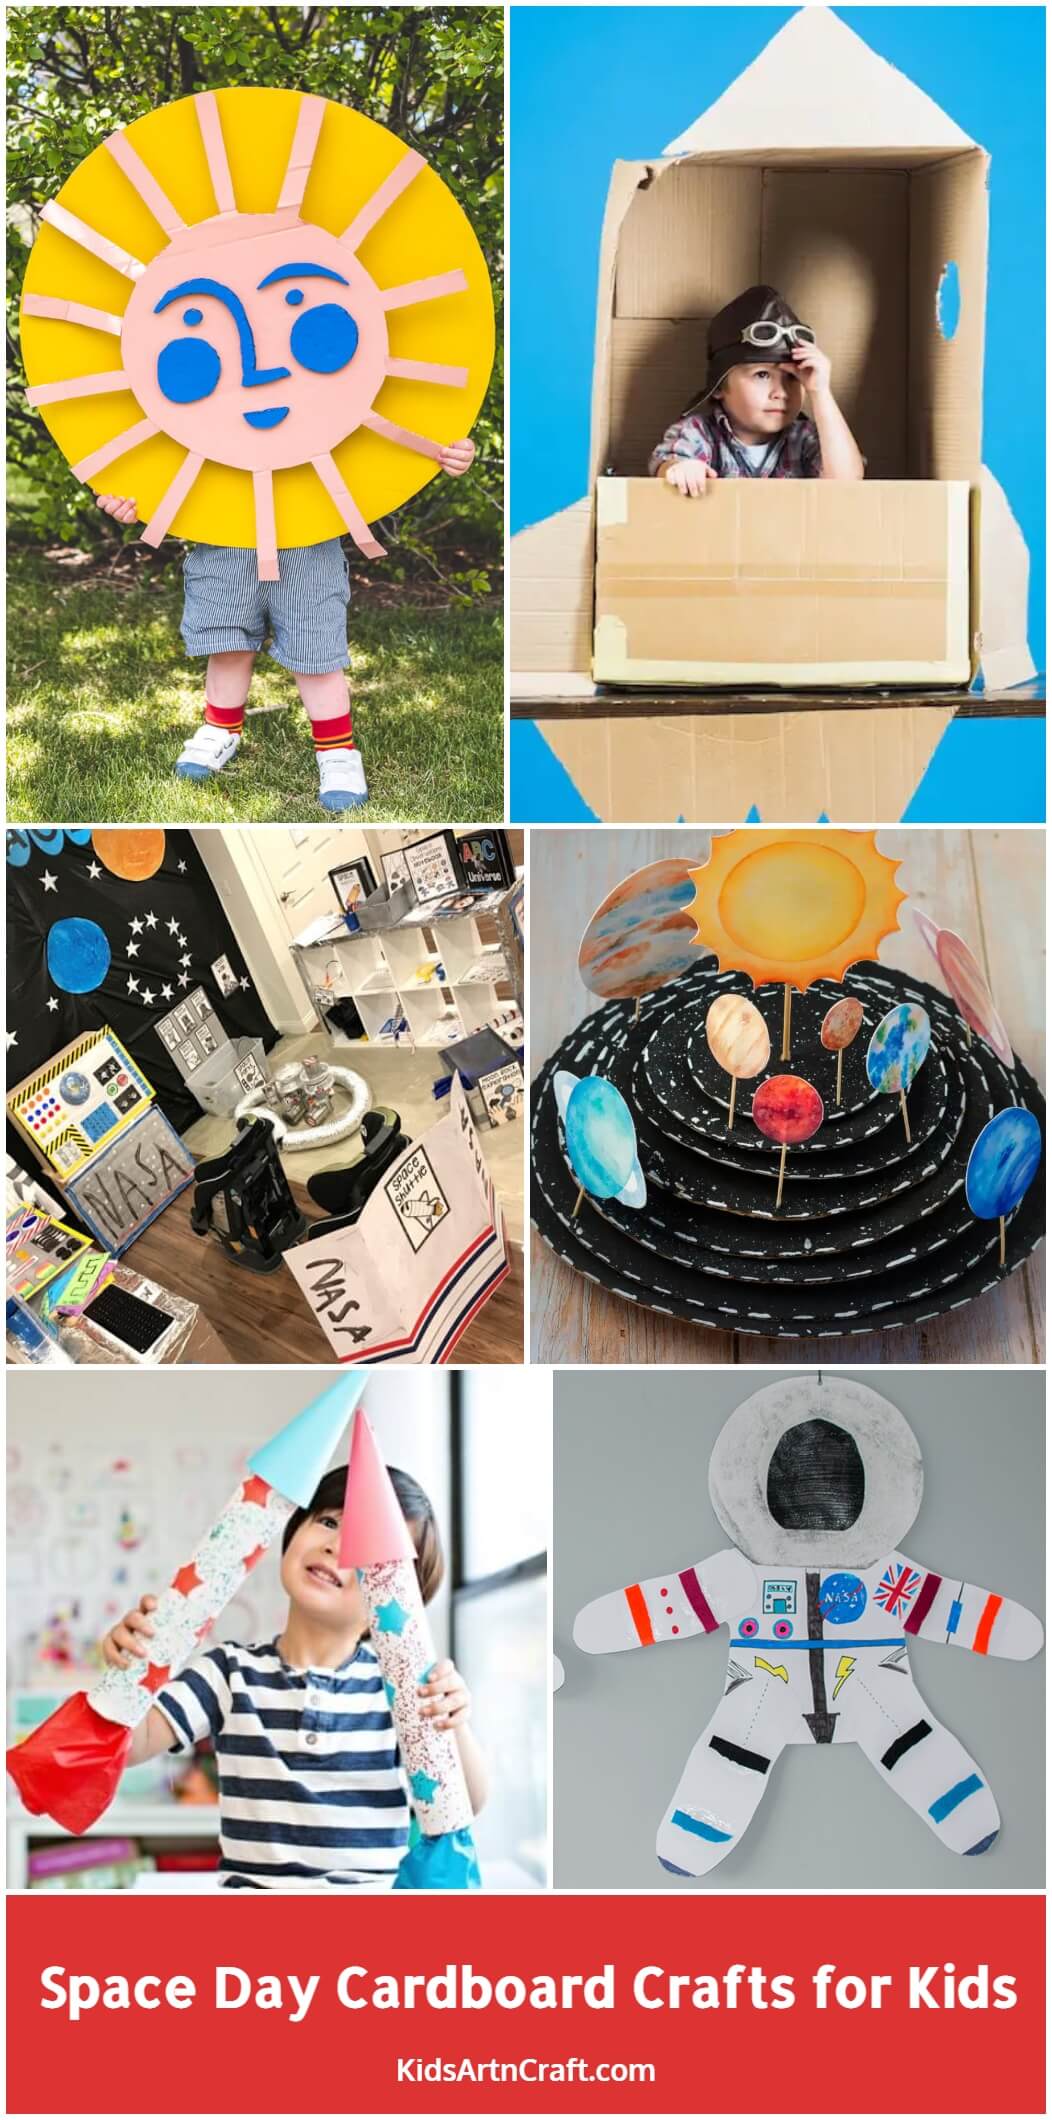 Space Day Cardboard Crafts for Kids